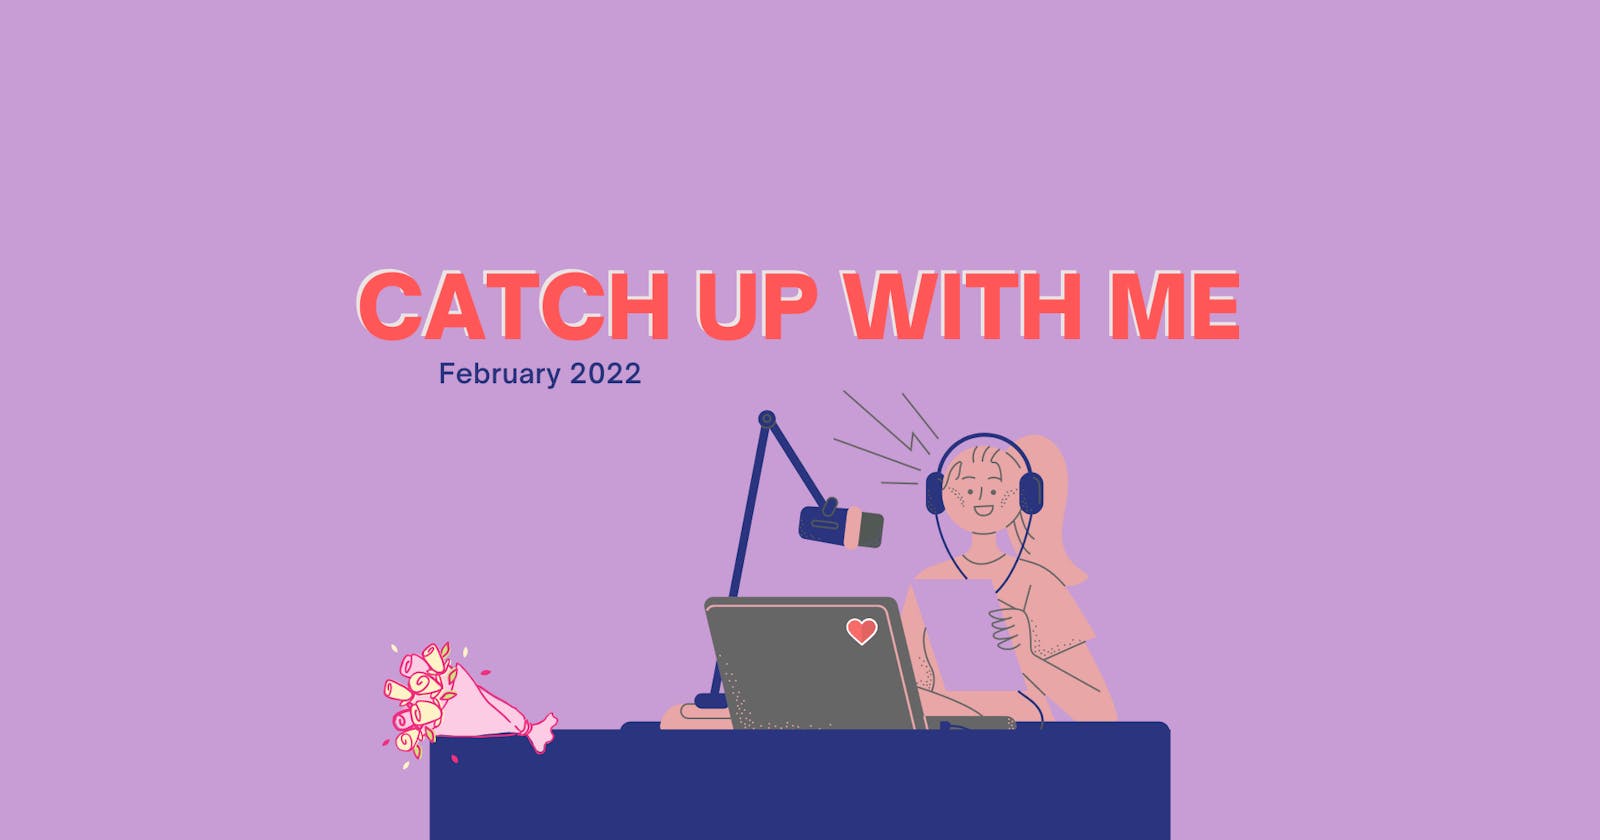 Catch up with me - February 2022